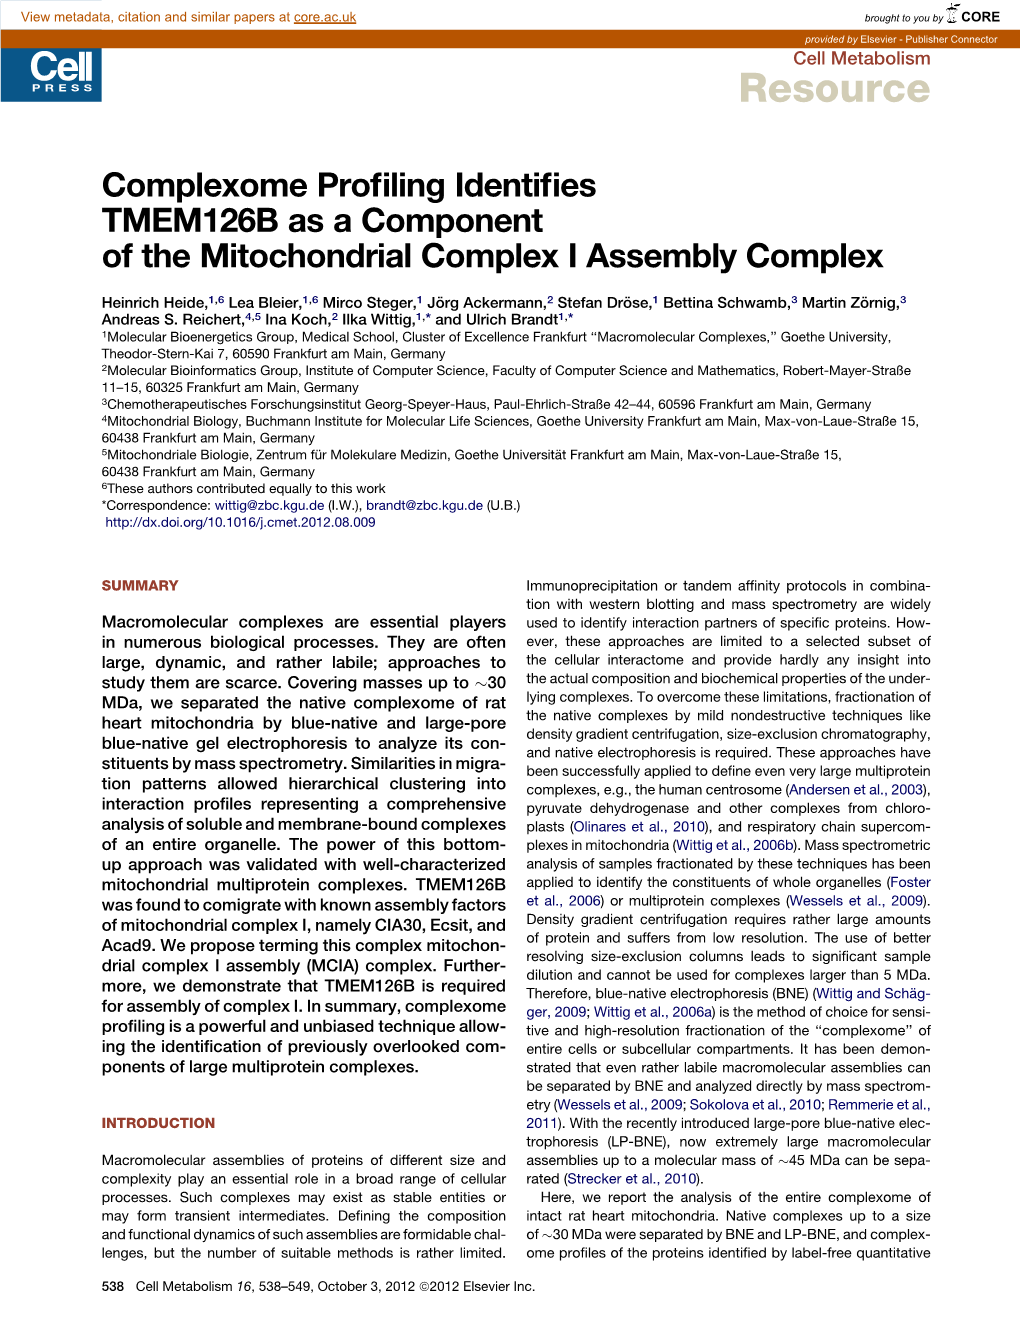 Complexome Profiling Identifies TMEM126B As a Component of The